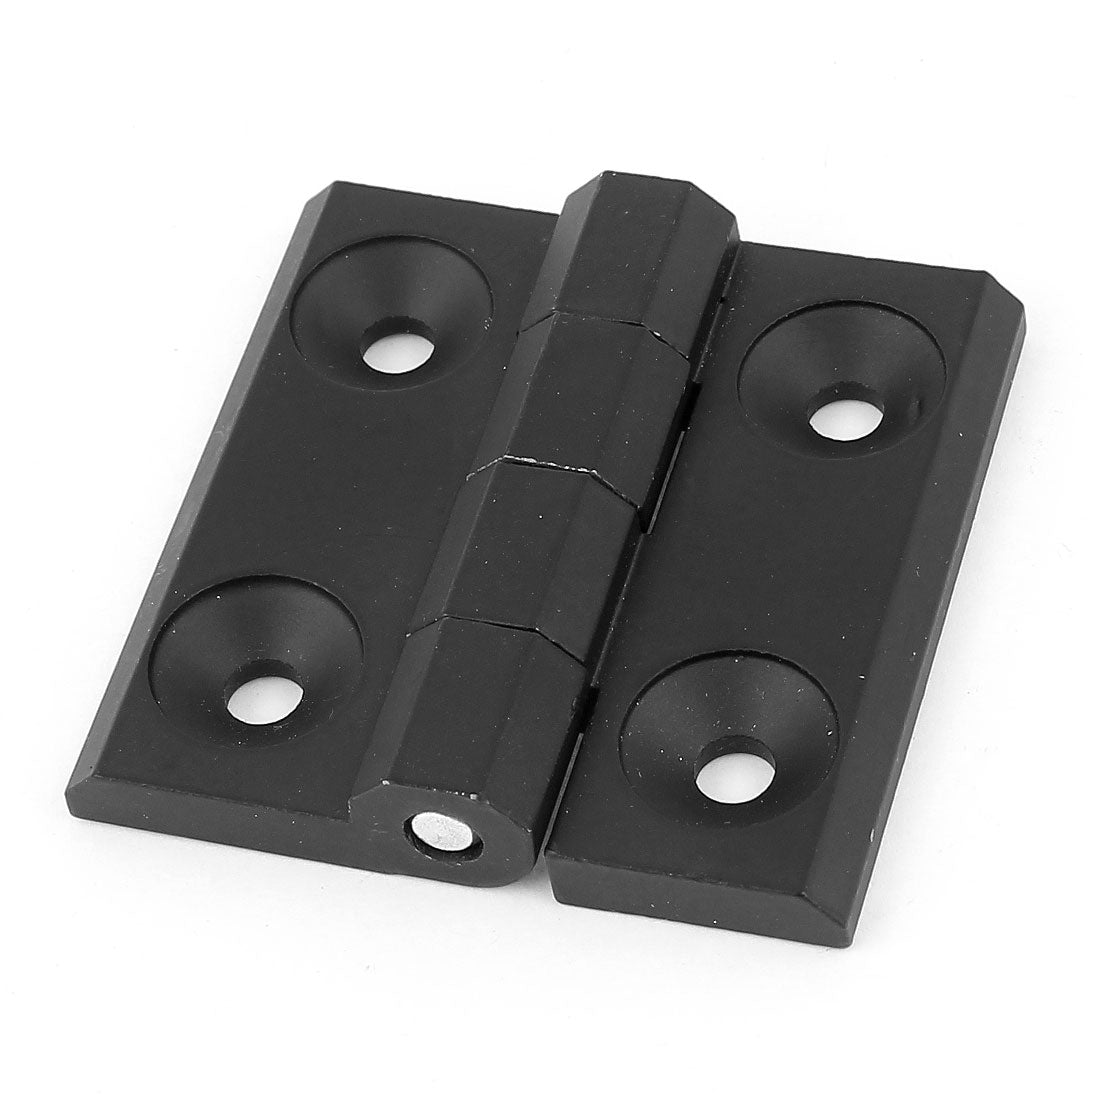 uxcell Uxcell 60mm x 60mm Square Black Aluminum Window Cabinets Door Hinges